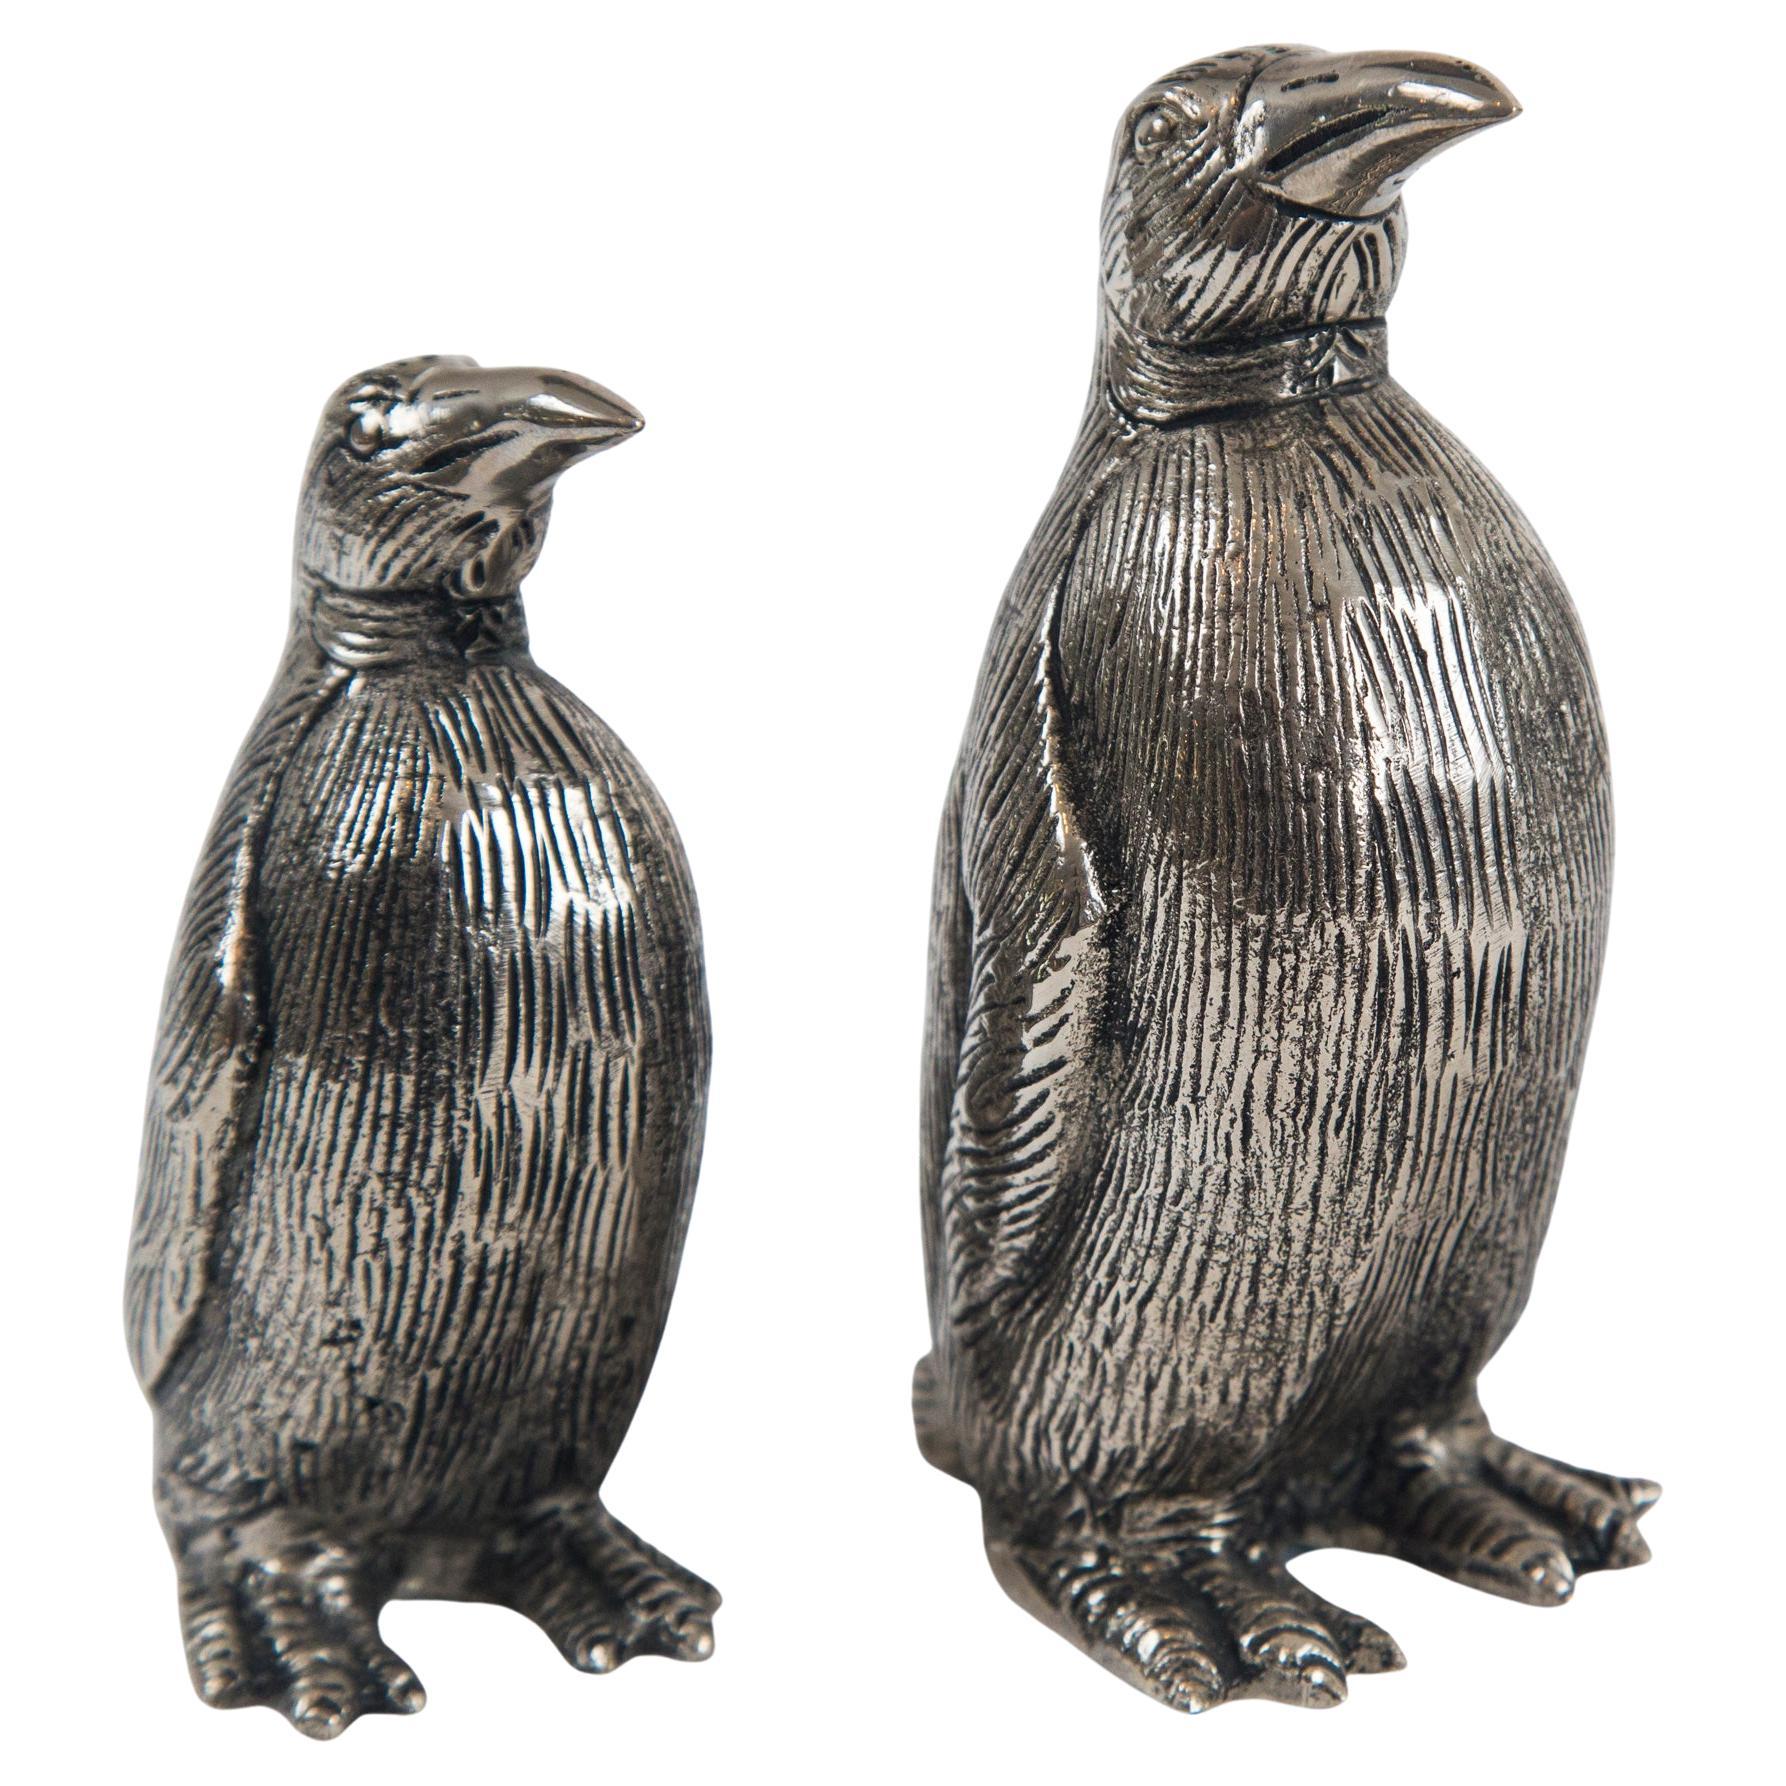 Gucci Penguin Salt and Pepper Shakers, Silver Plate Over Pewter